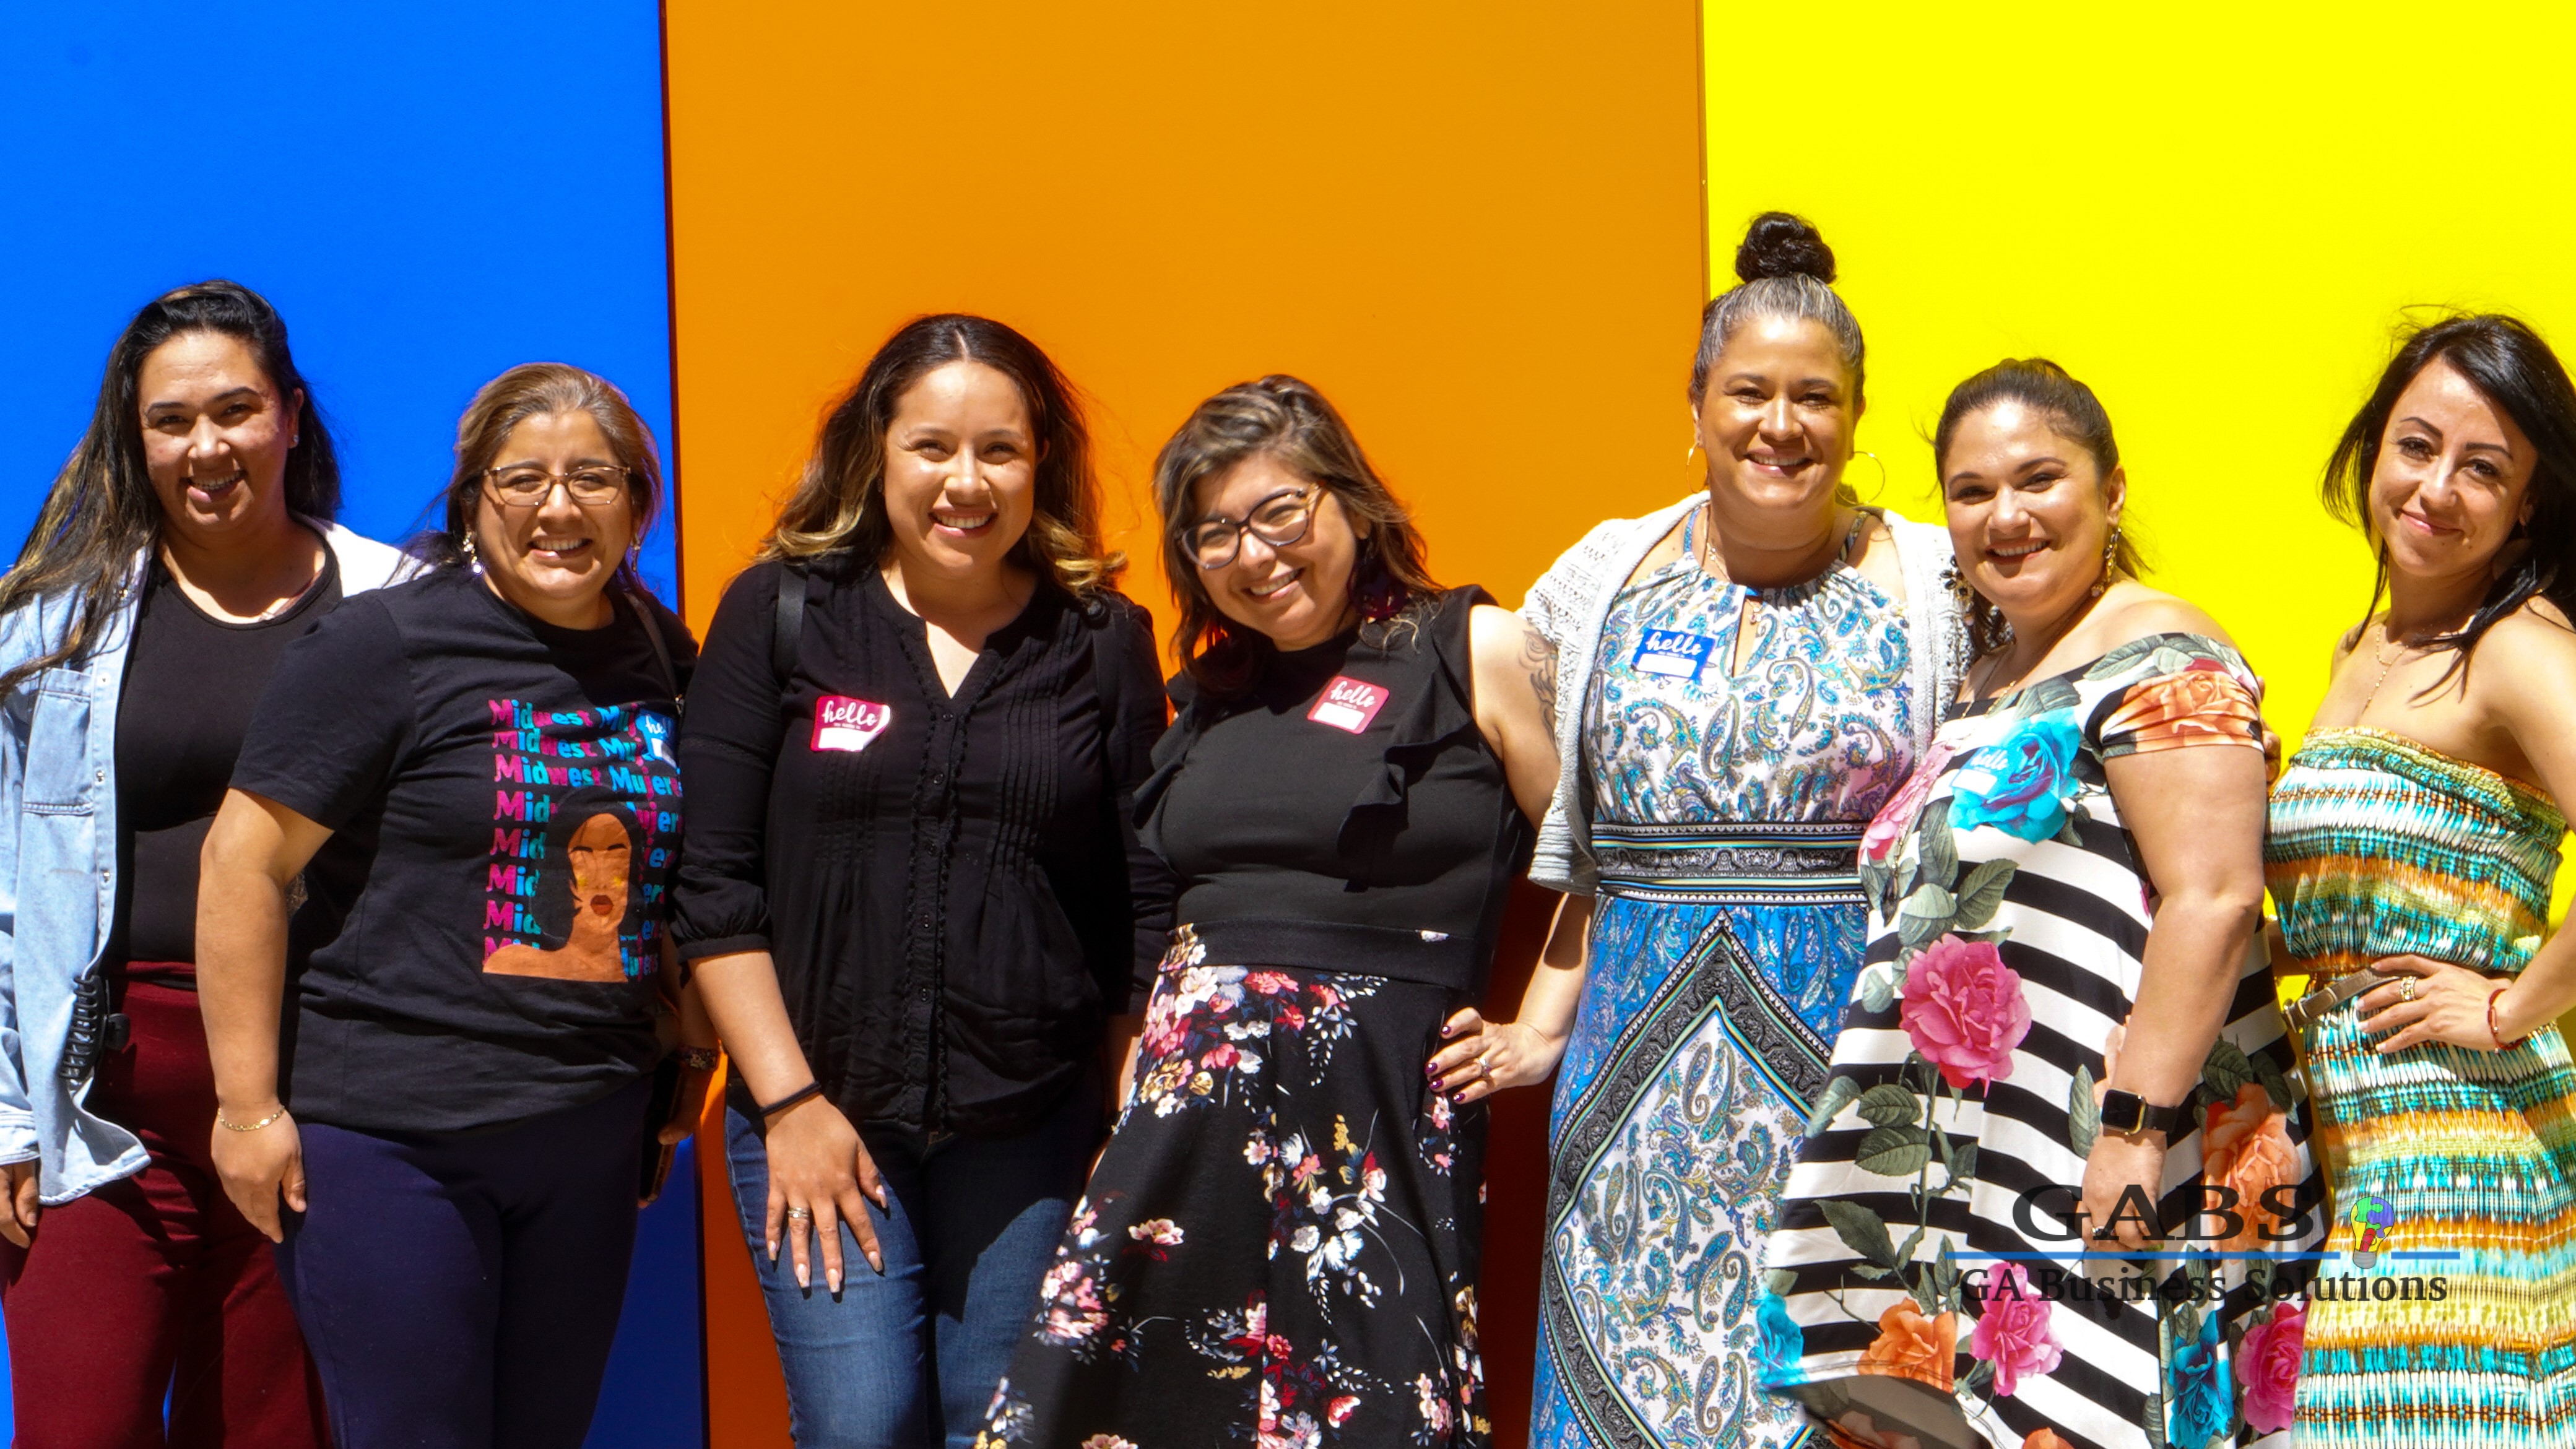 Araceli Esparza (center) with 6 other Latina women standing in front of a bright blue, orange and yellow backdrop and smiling.